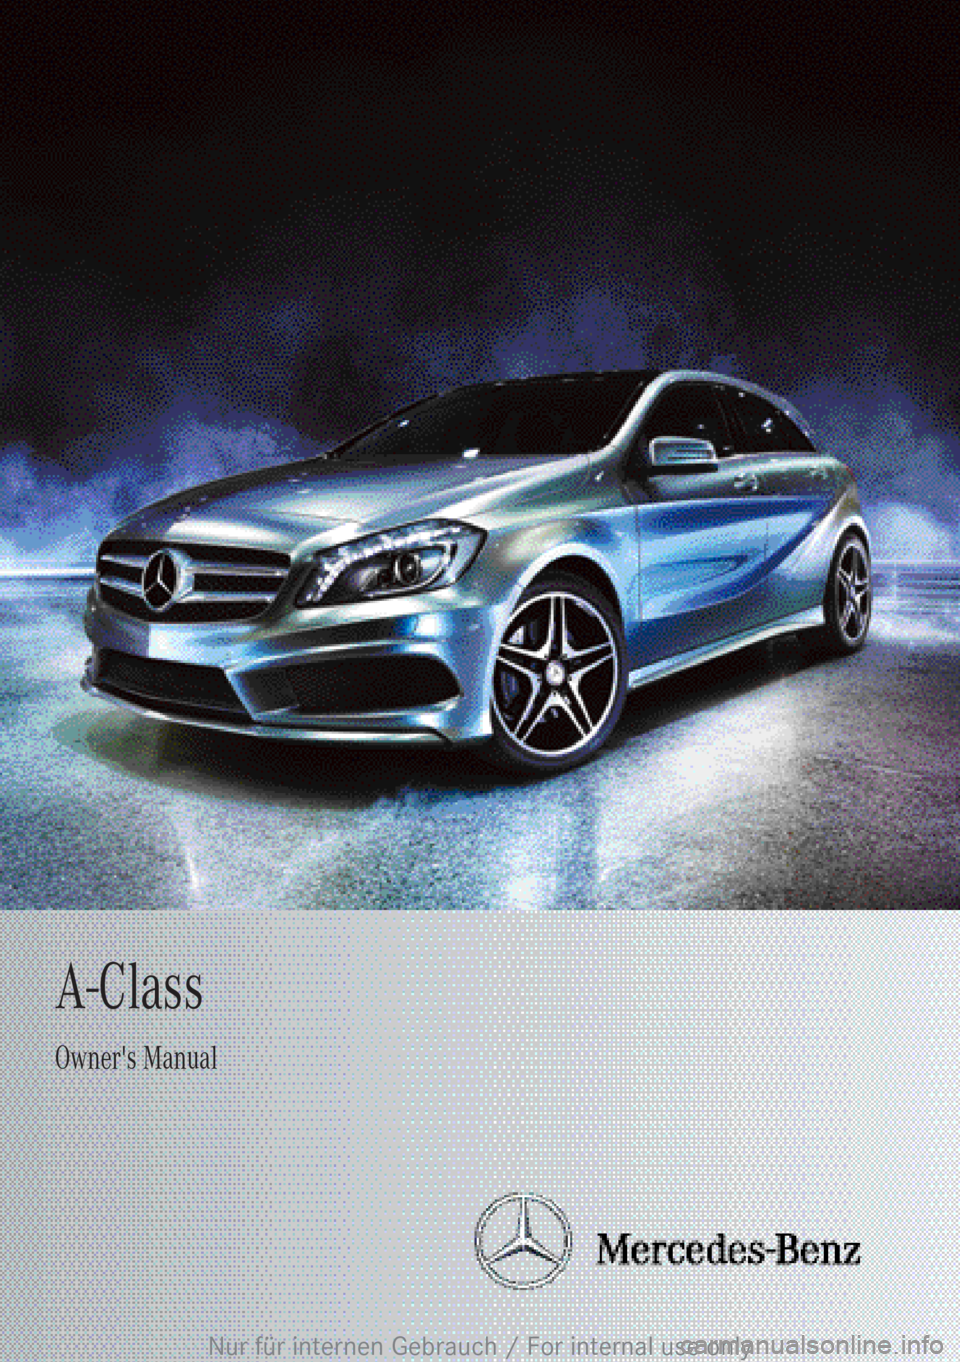 MERCEDES-BENZ A CLASS 2012  Owners Manual A-Class
Owner's ManualNur für internen Gebrauch / For internal use only 